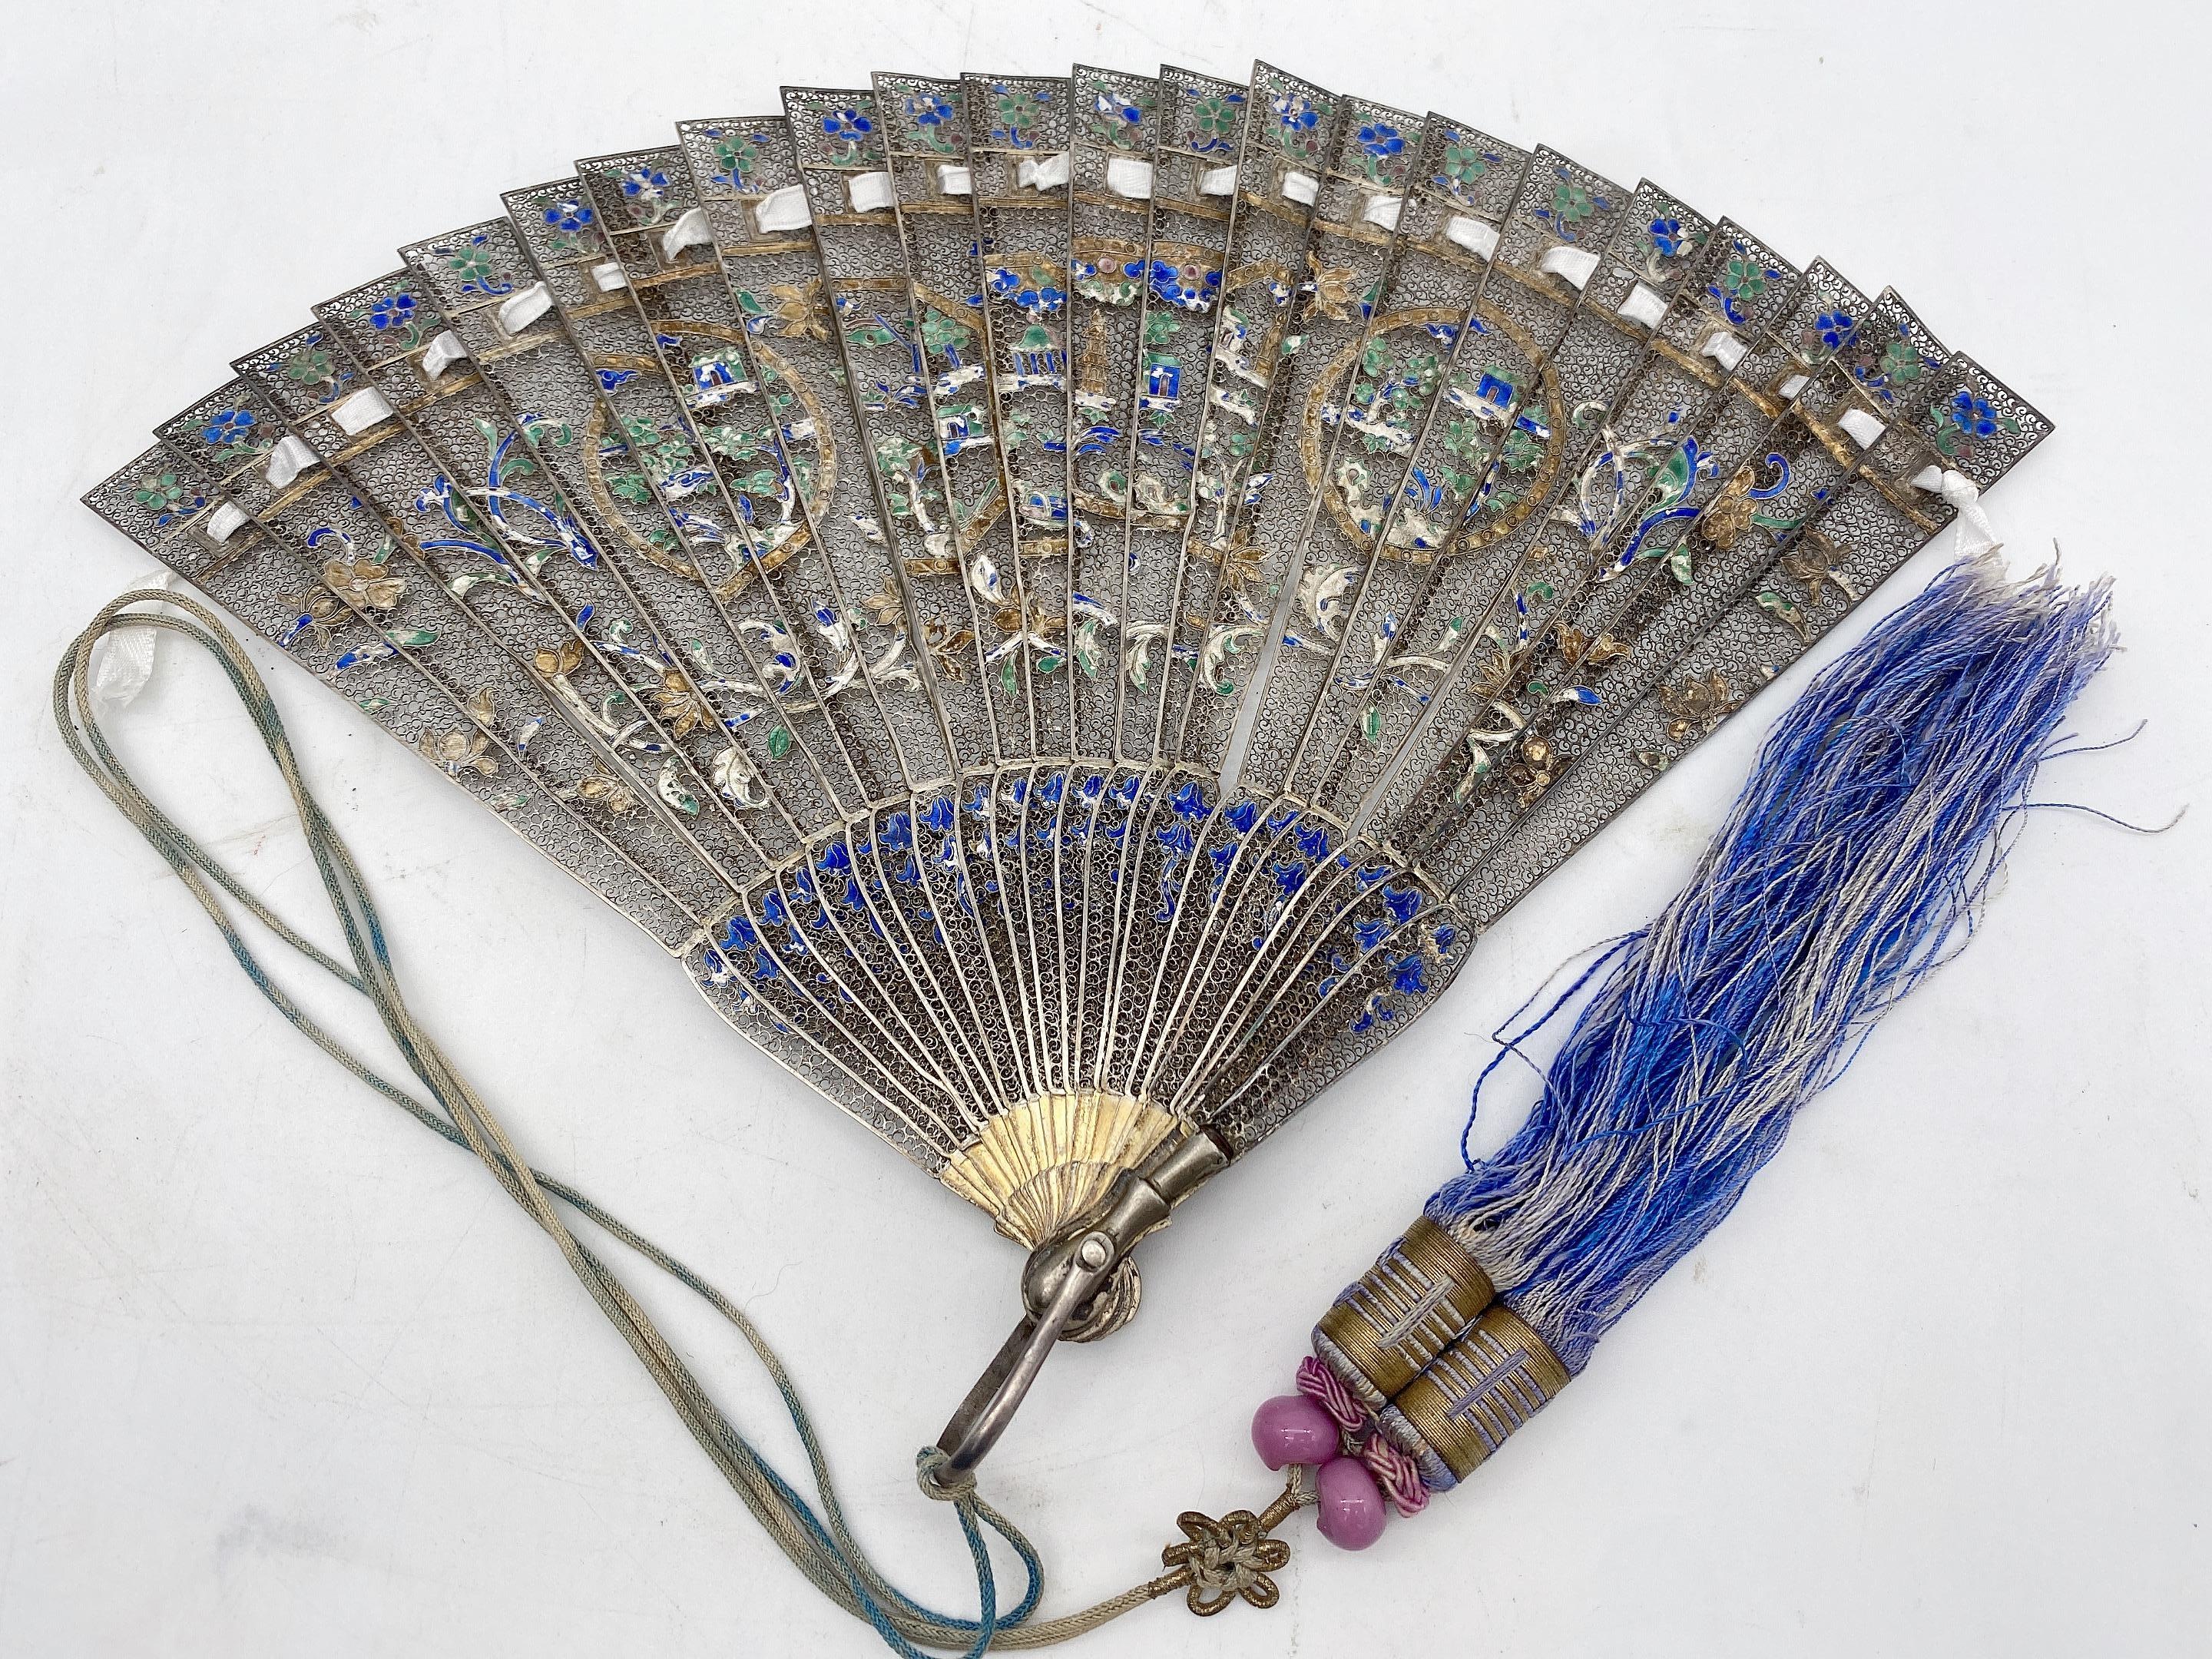 Rare Fine Antique early 19th century Chinese gilt silver filigree and enamel brise fan , Qing dynasty, the fan has 22 sticks with a 18k gold ring loop , wonderful sticks with silver wire filigree and enamel blue , green and yellow in both sides ,